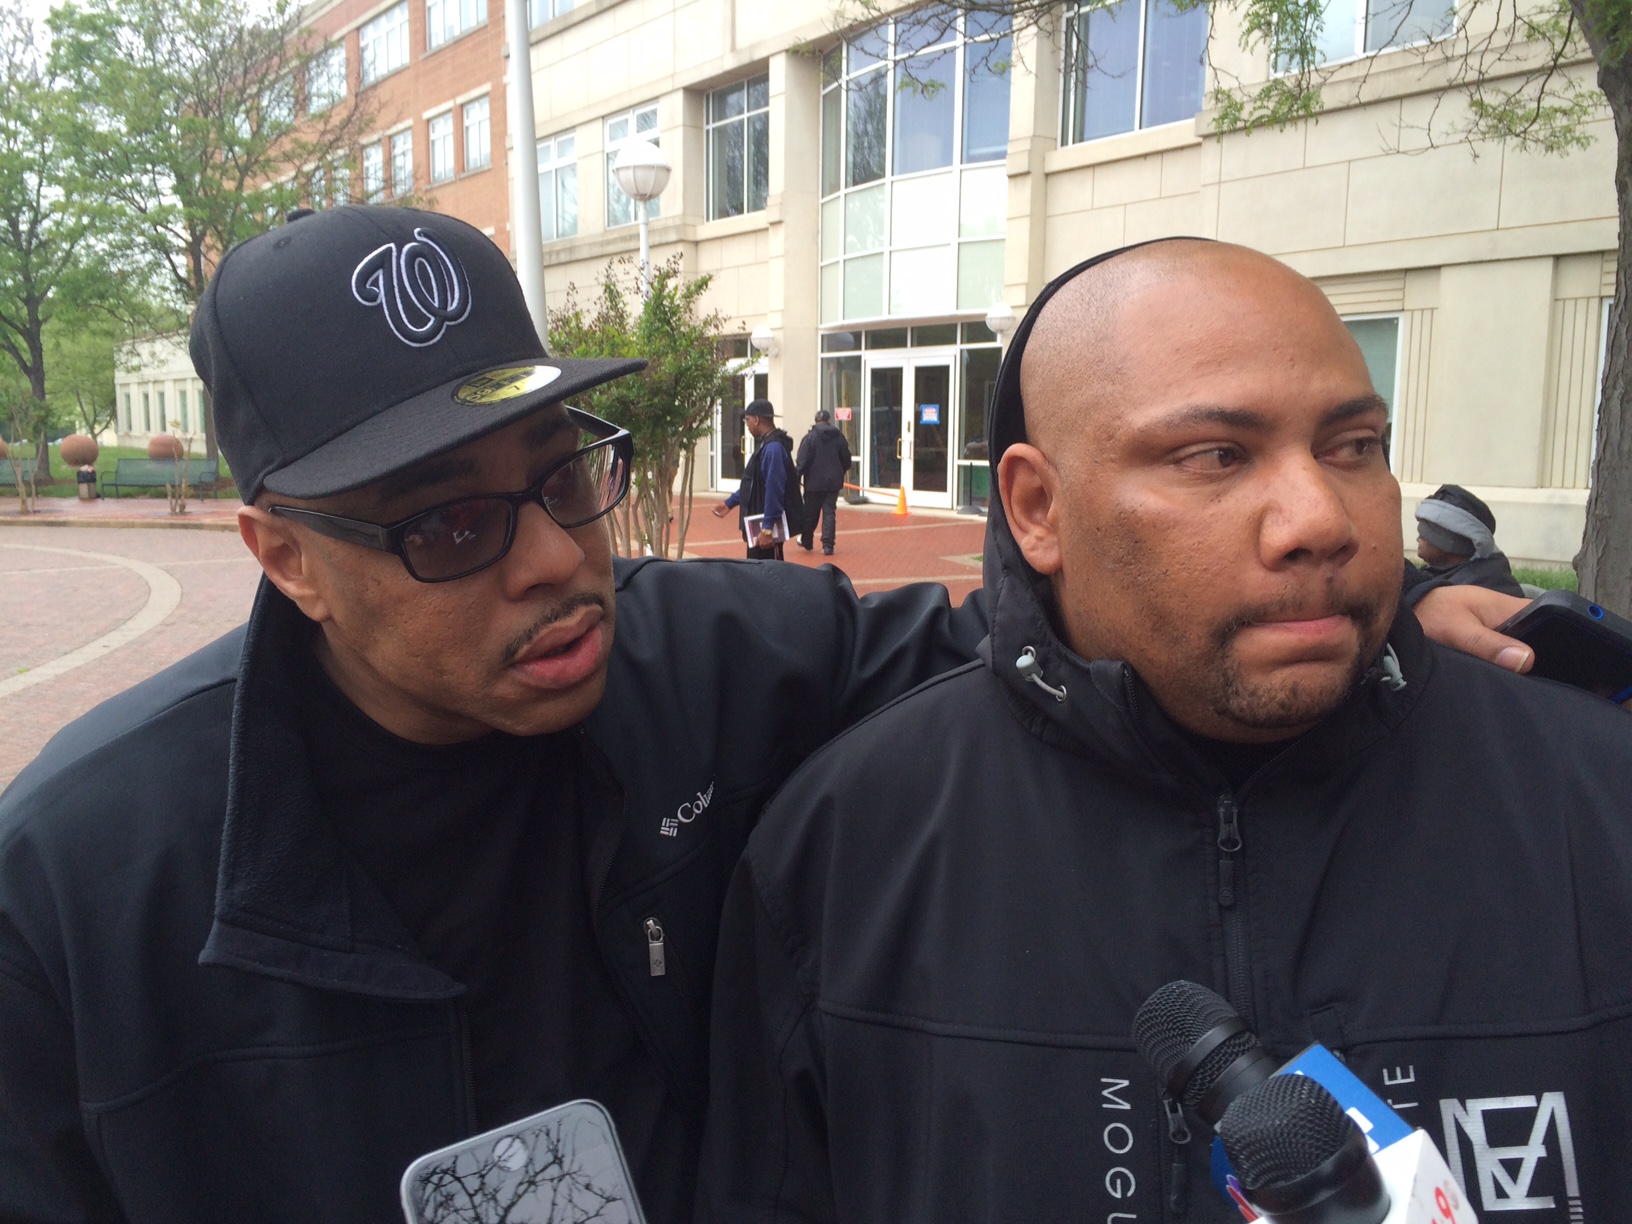 Walter Thompson (right), family member of Det. Joseph Newell, gets emotional speaking about him, Thompson disagrees with the jury's verdict, "It was a murder." (WTOP/John Aaron)